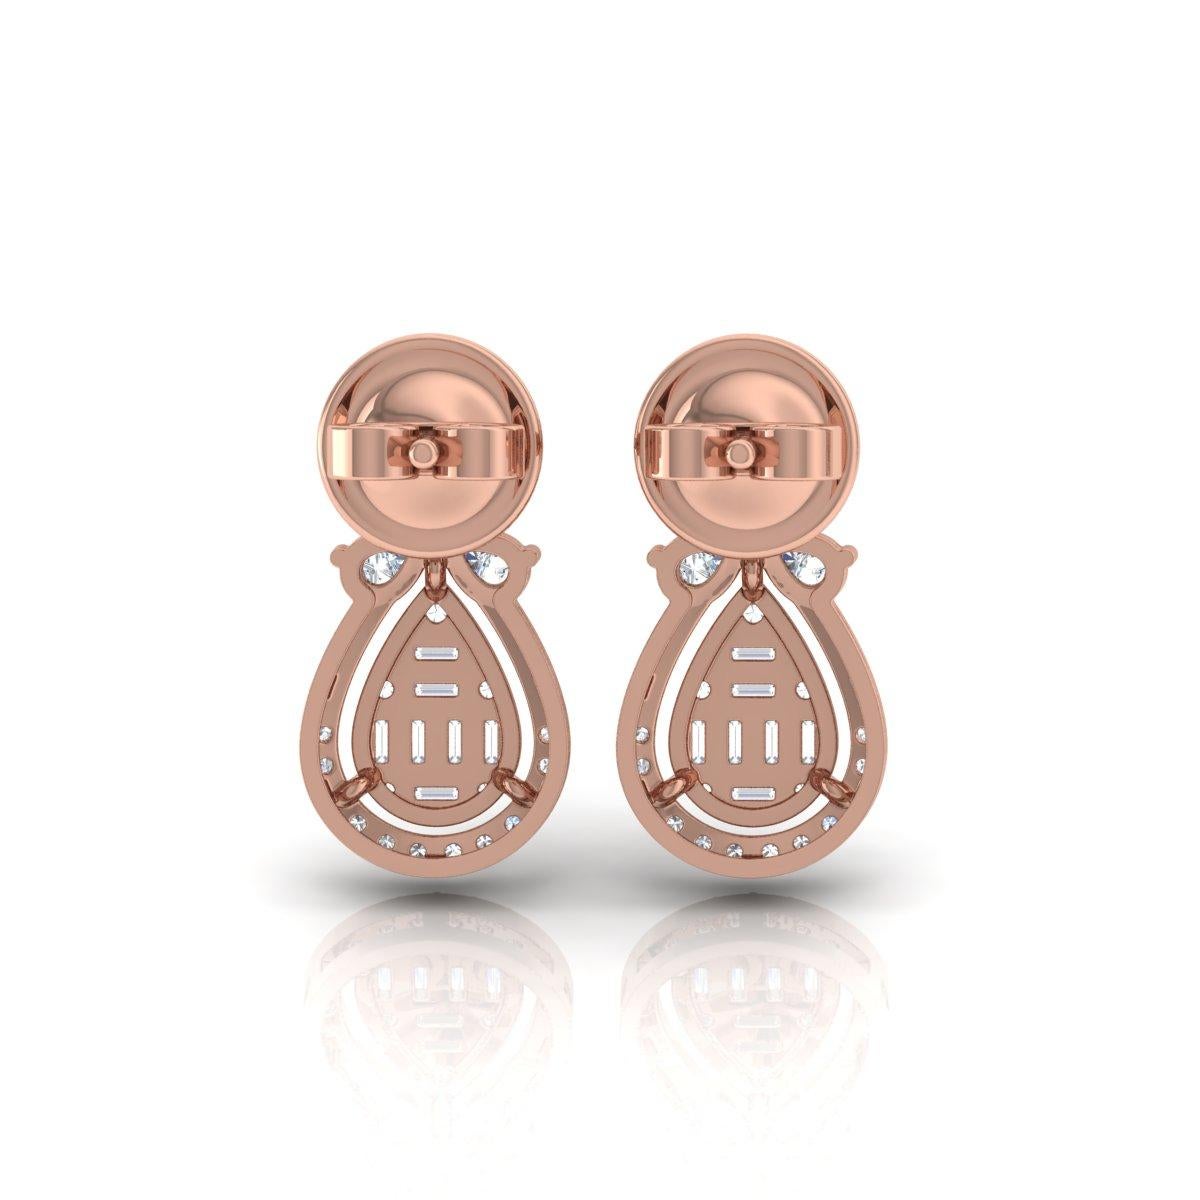 Item Code :- SEE-1735
Gross Weight :- 3.03 gm
14k Rose Gold Weight :- 2.86 gm
Diamond Weight :- 0.85 carat  ( AVERAGE DIAMOND CLARITY SI1-SI2 & COLOR H-I )
Earrings Size :- 17 mm approx.

✦ Sizing
.....................
We can adjust most items to